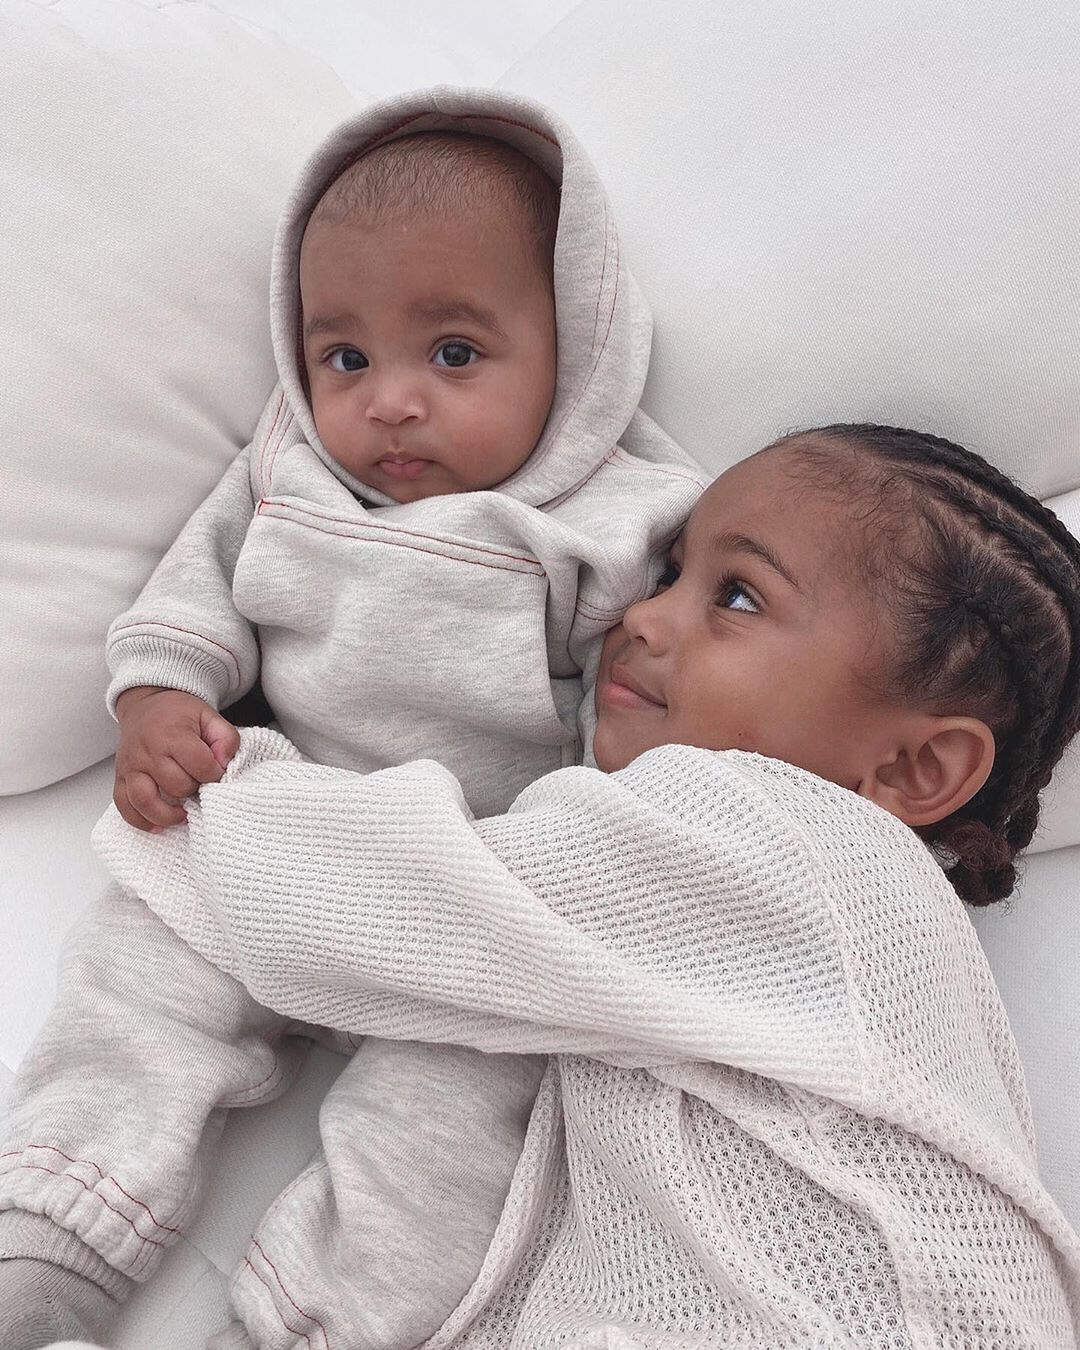 Kim posted a sweet video of her youngest child on Instagram captioned, 'My baby Psalm turns 1 years old today!!!!!!'